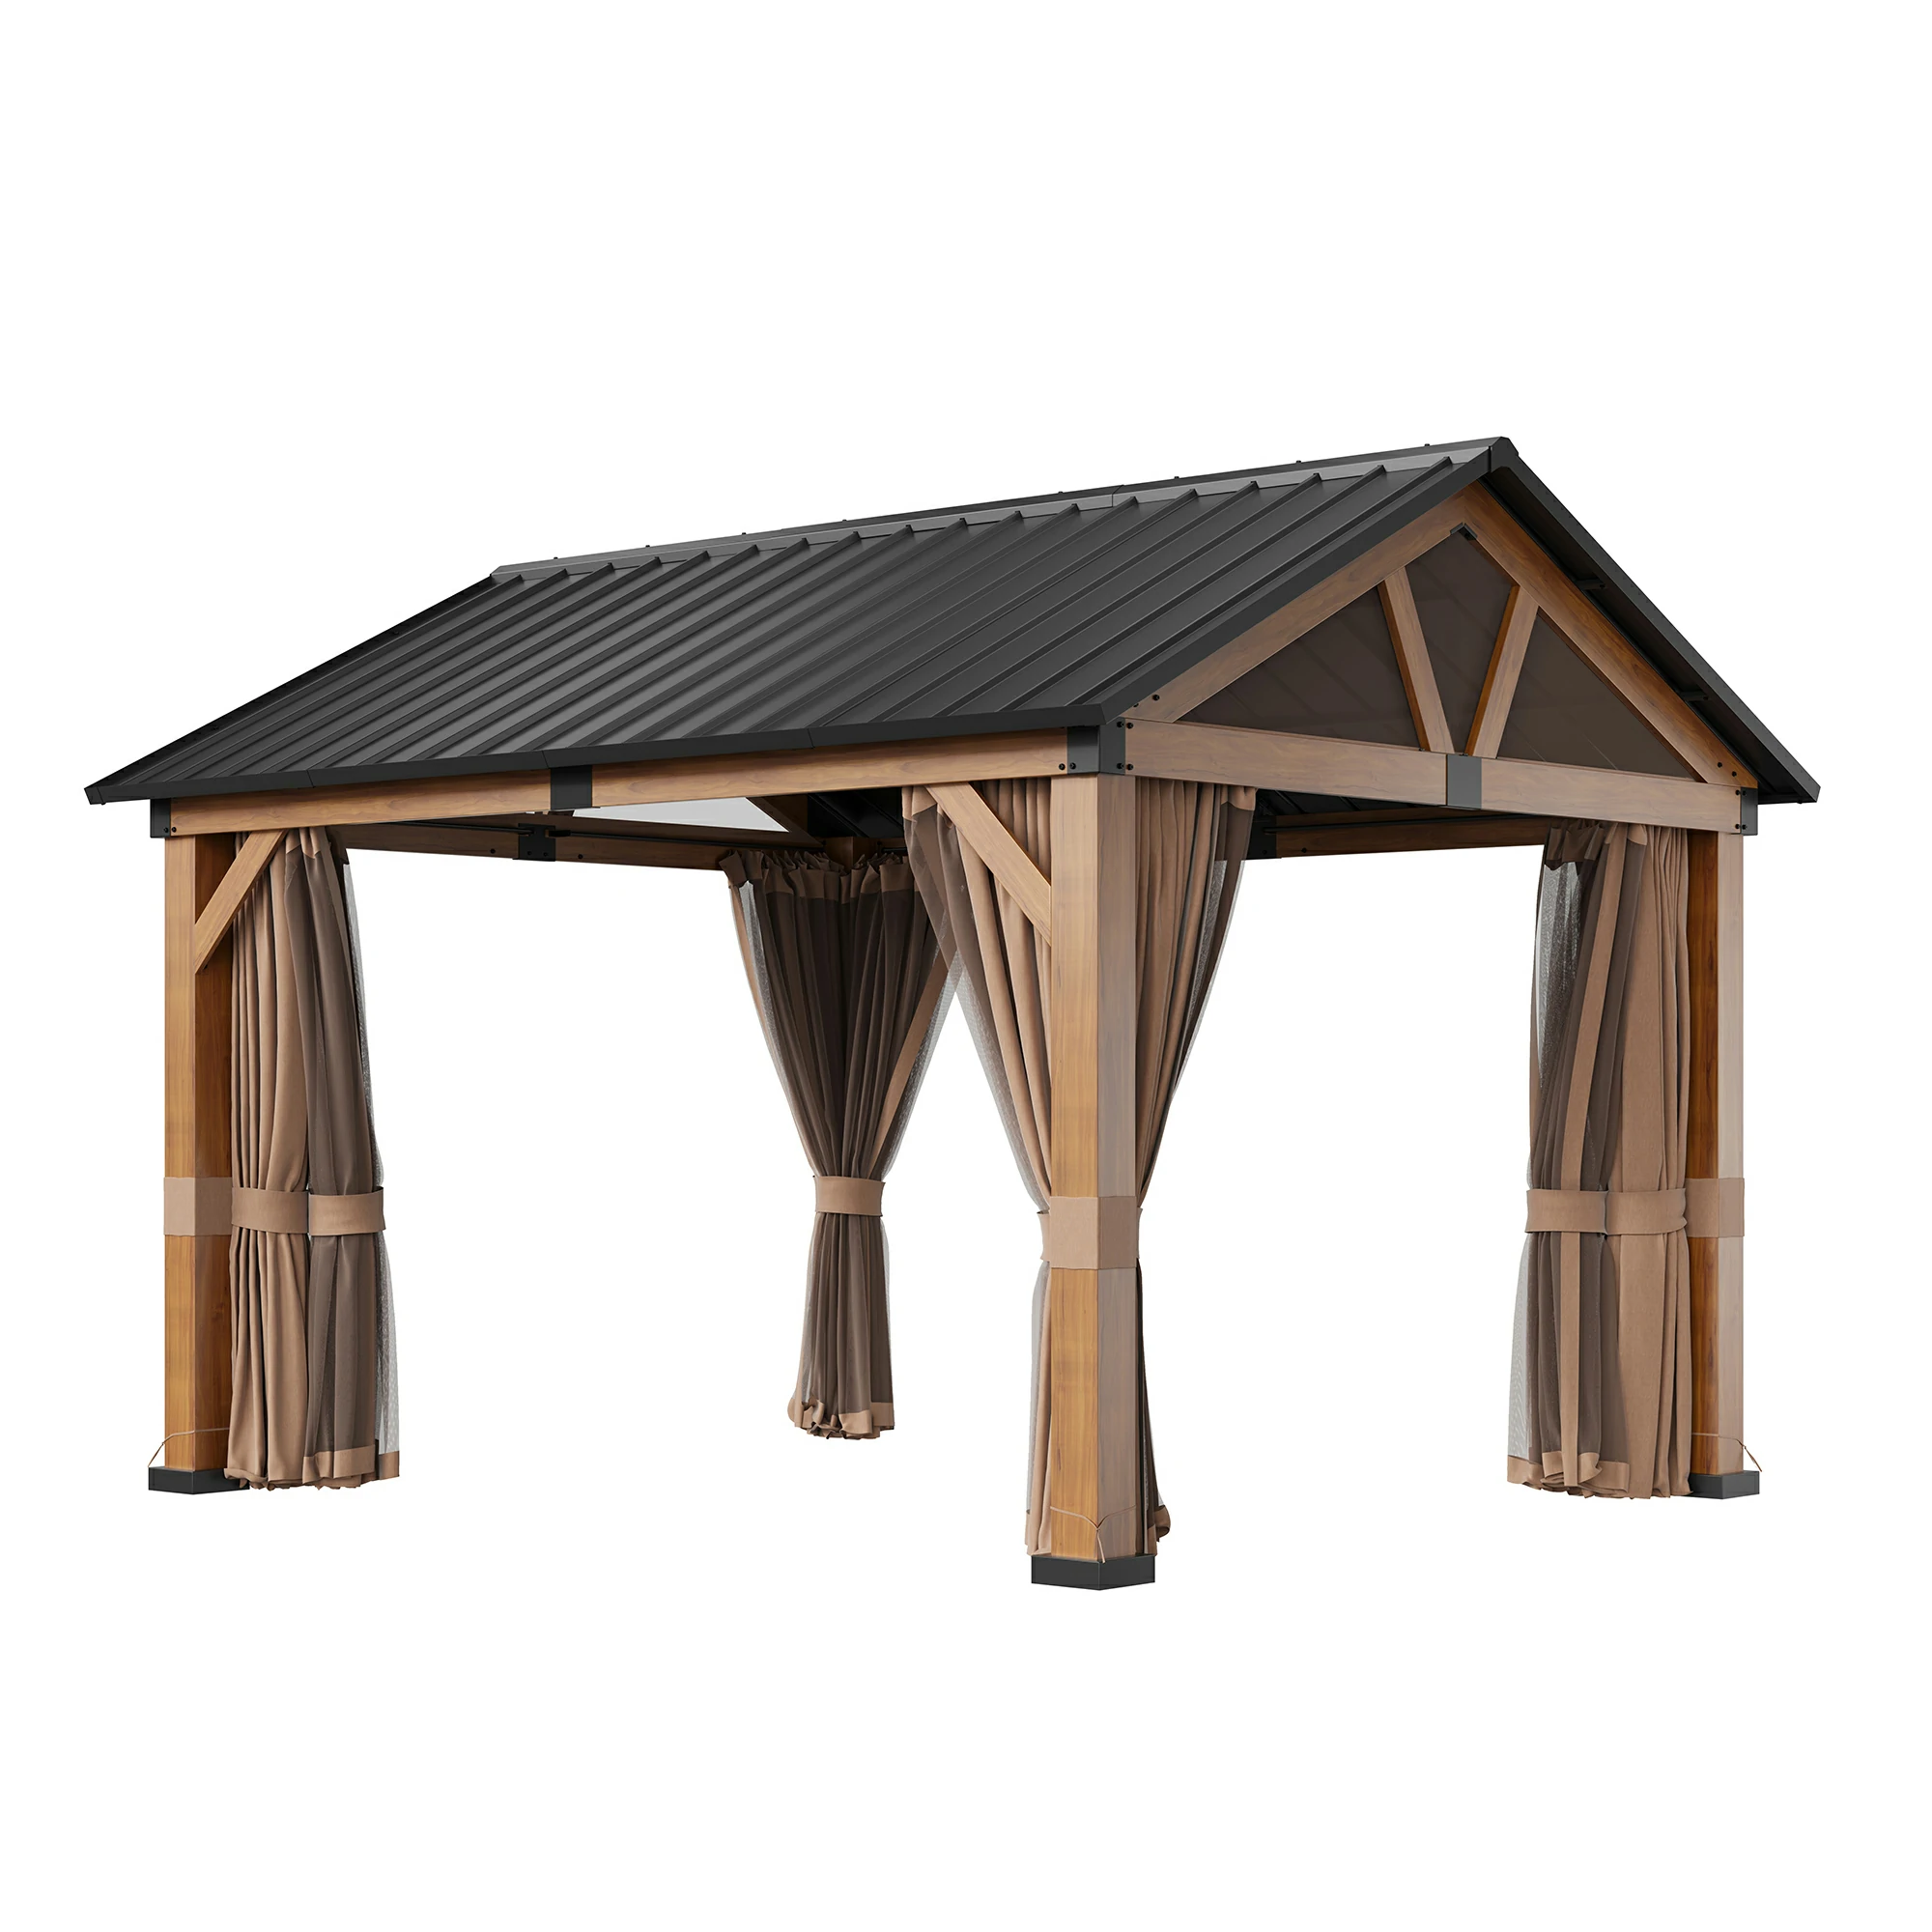 13 ft. x 11 ft. Patio Gable Roof Hardtop Gazebo Aluminium Frame Galvanized Steel Top with Curtain and Mesh Net